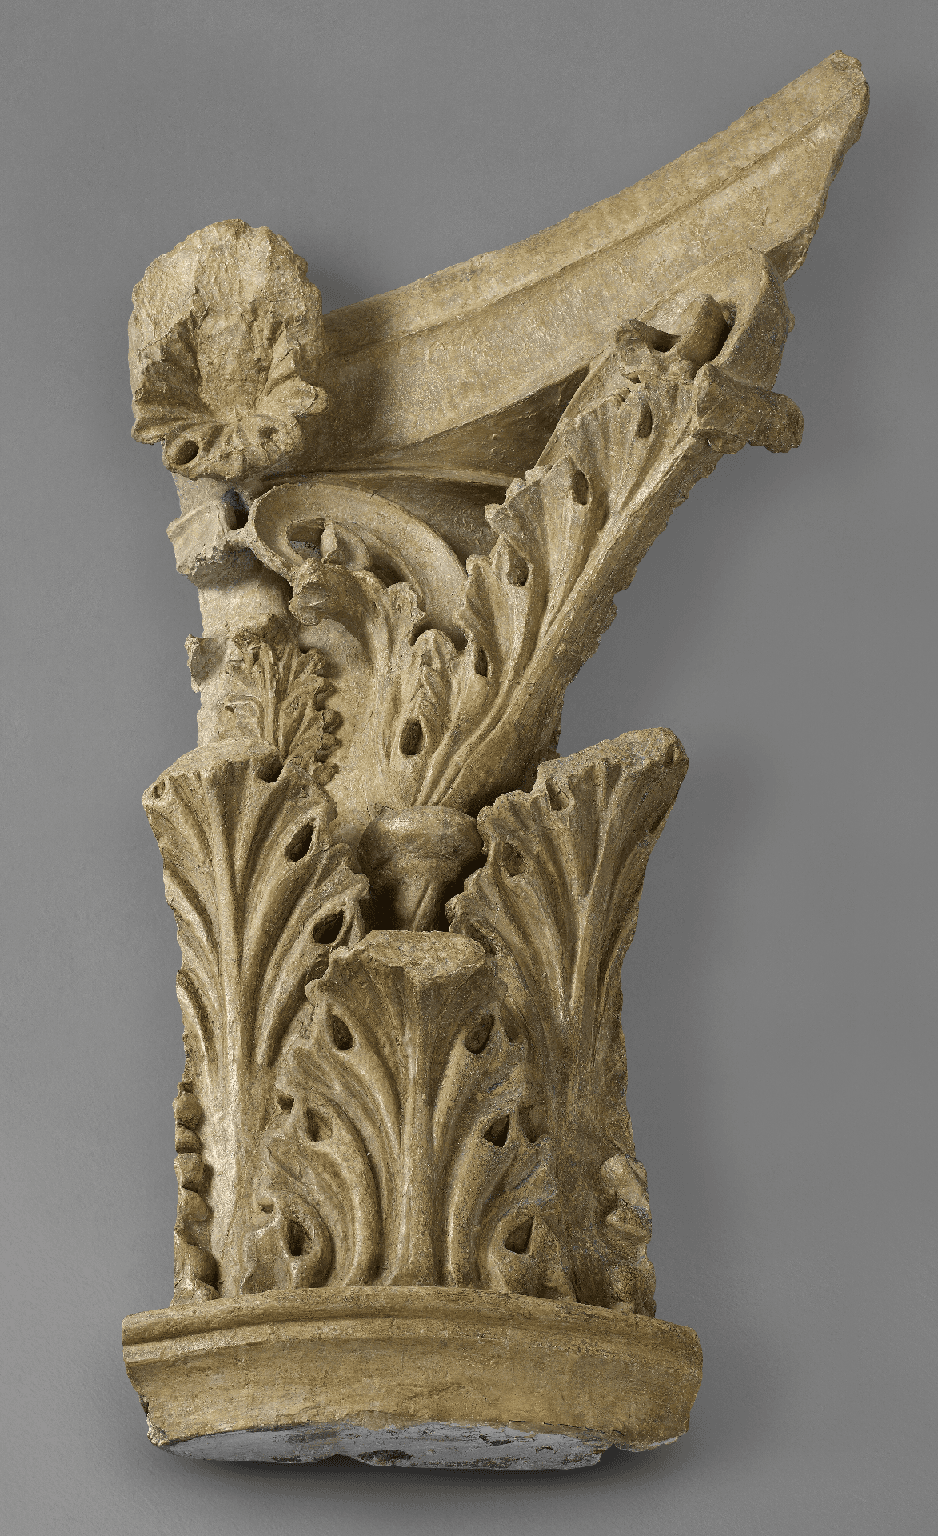 A cast of one-quarter of a Corinthian capital of the Round Temple near Tiber in Rome, late 18th century or early 19th century. Plaster cast. Height: 4 feet 10 1/2 inches, Width: 2 feet 11 1/2 inches. (Royal Academy of Arts, London)